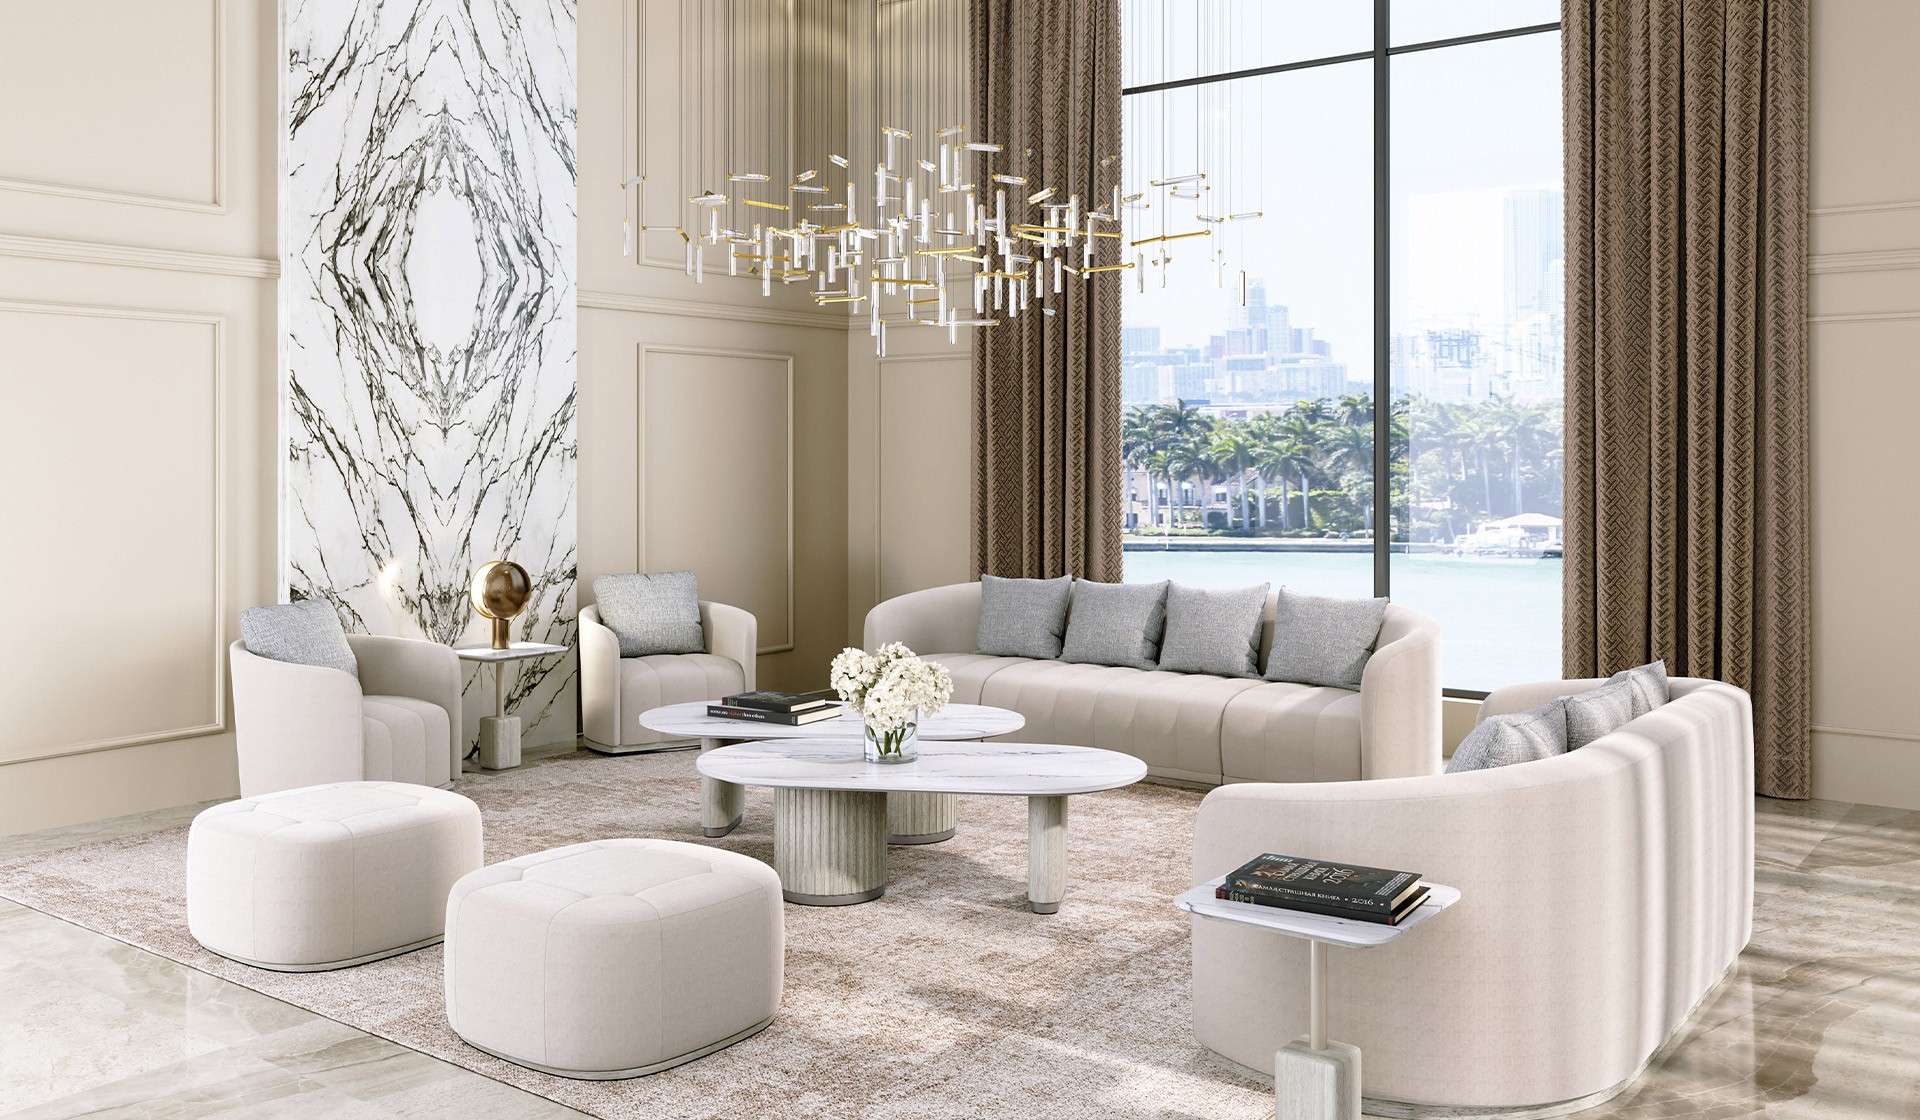 ADRIANA HOYOS Launches Newest Luxury Furniture Collection